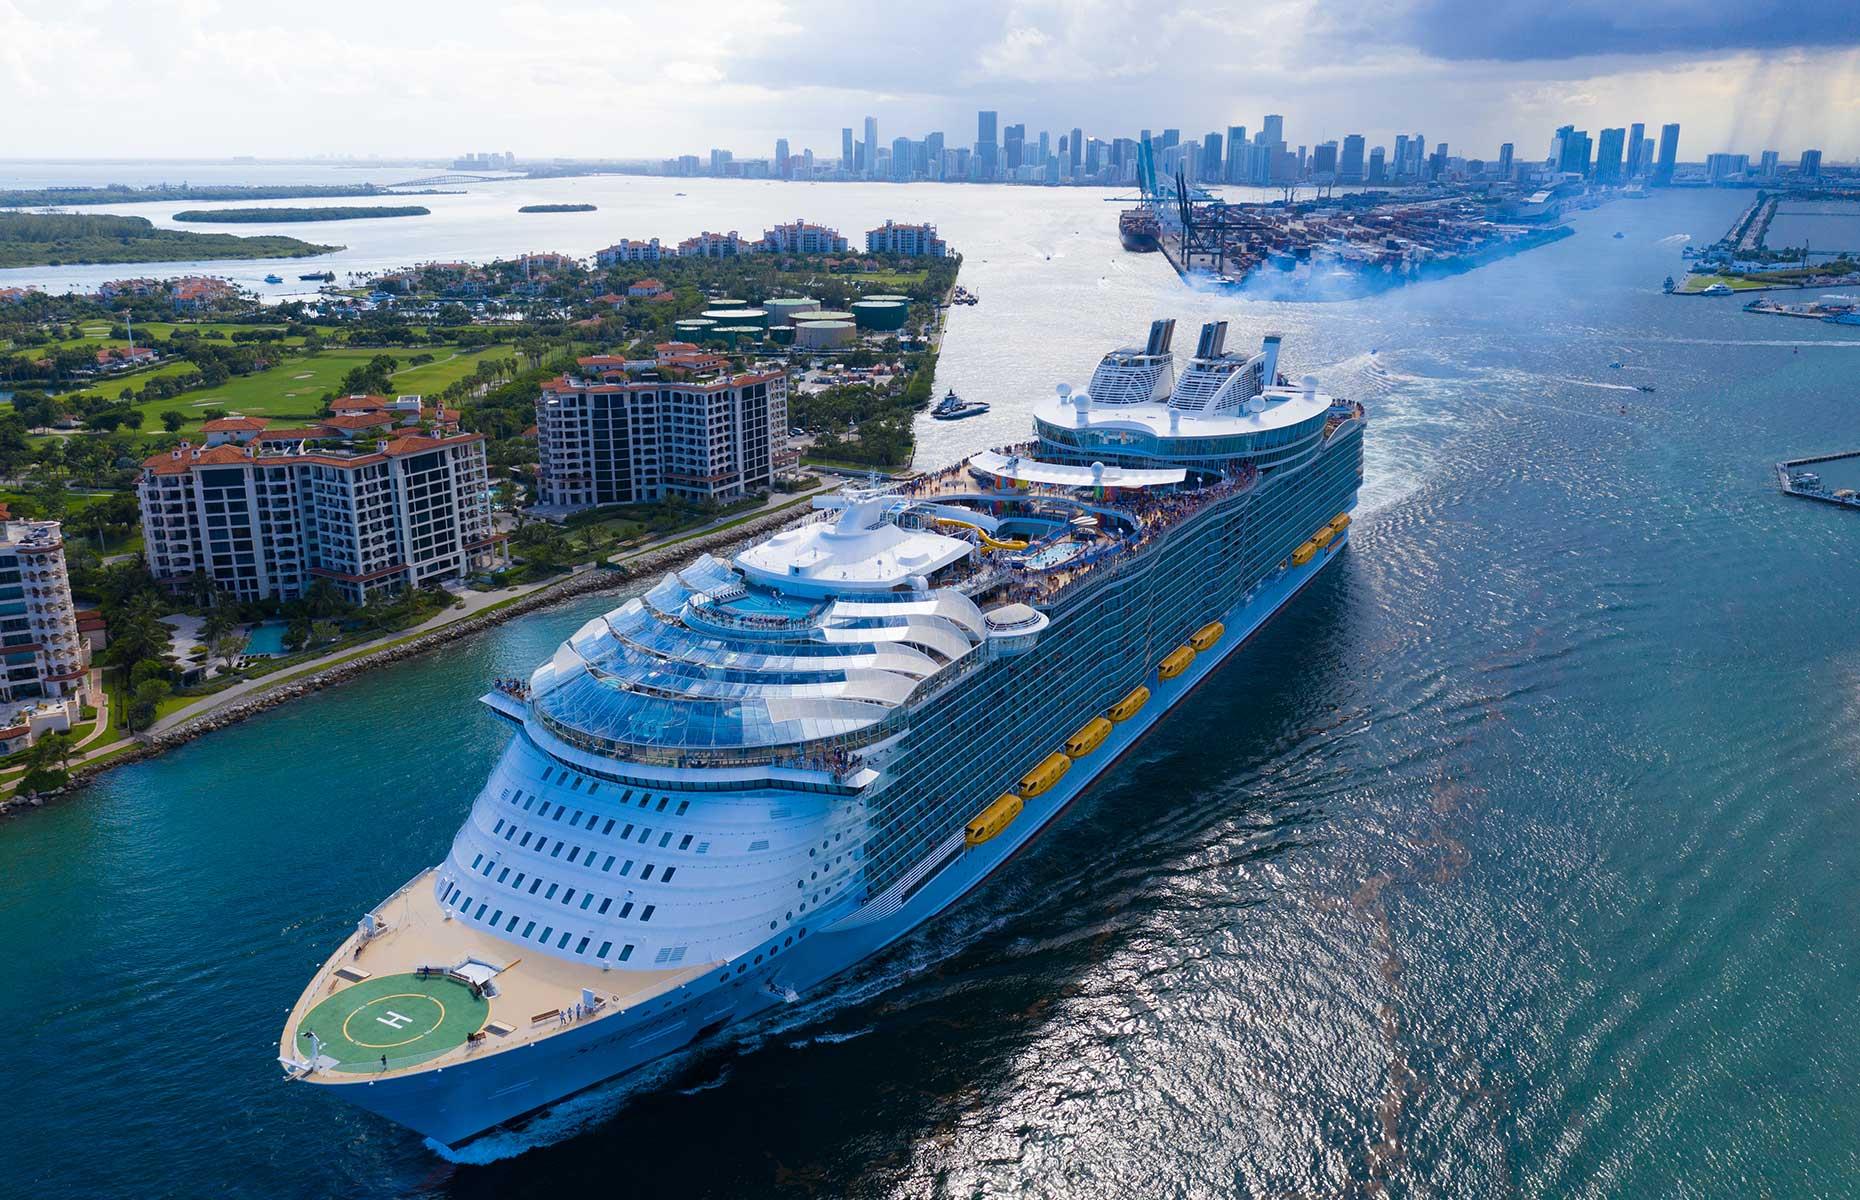 Cruise ships continued to expand in the 2010s while cruising itself became the fastest-growing category in the leisure travel market. Royal Caribbean’s Symphony of the Seas (pictured here) launched in 2018 as the largest cruise ship in the world (until 2022). The tide began to turn on sustainability, with several cruise ships built to run on liquefied natural gas and battery power. Another health-based factor was reducing onboard smoking to selected areas only.